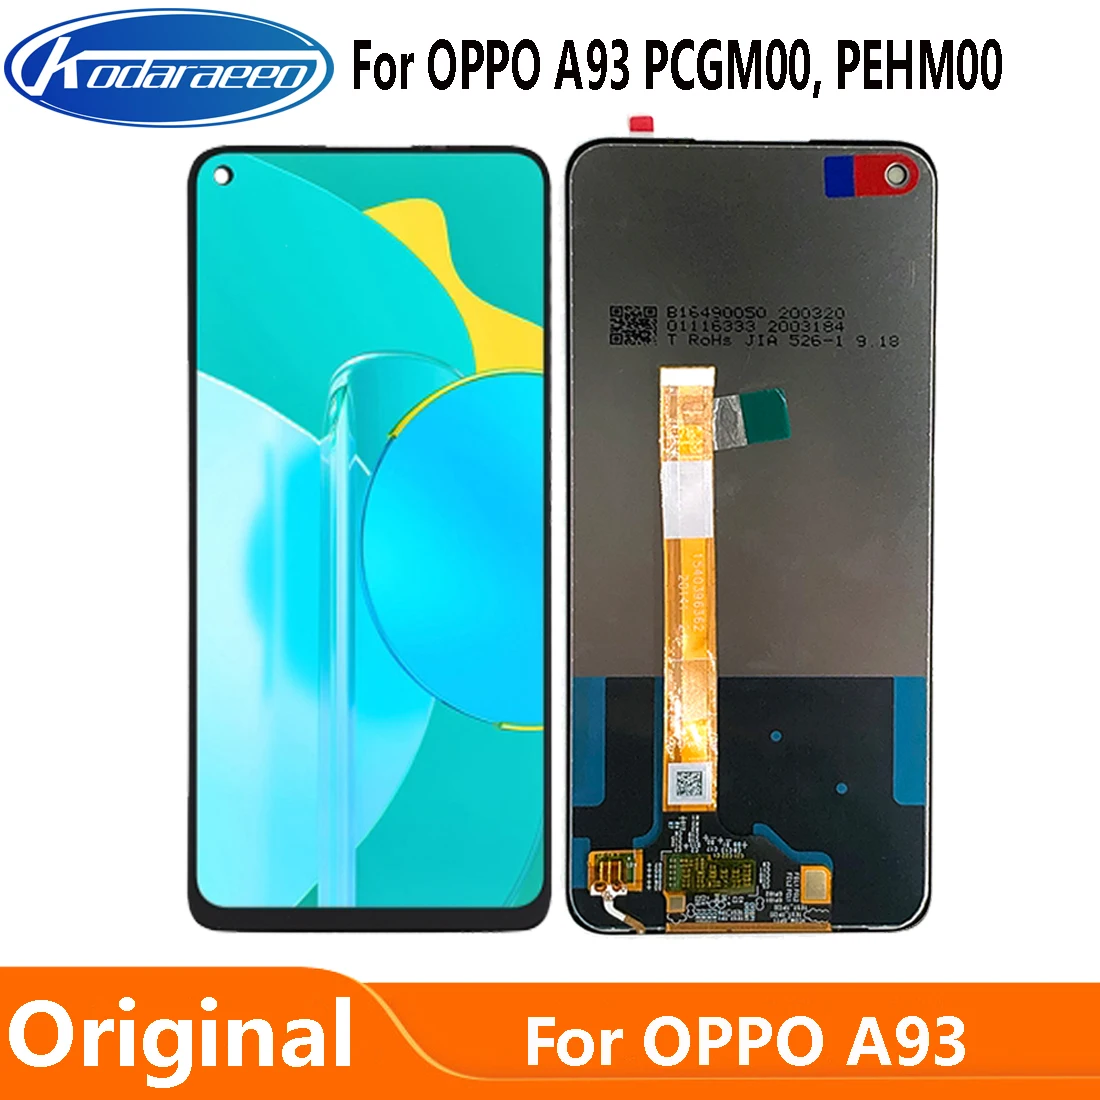 

Original 6.5" For OPPO A93 5G PCGM00 PEHM00 LCD Display Touch Screen Replacement Digitizer Assembly